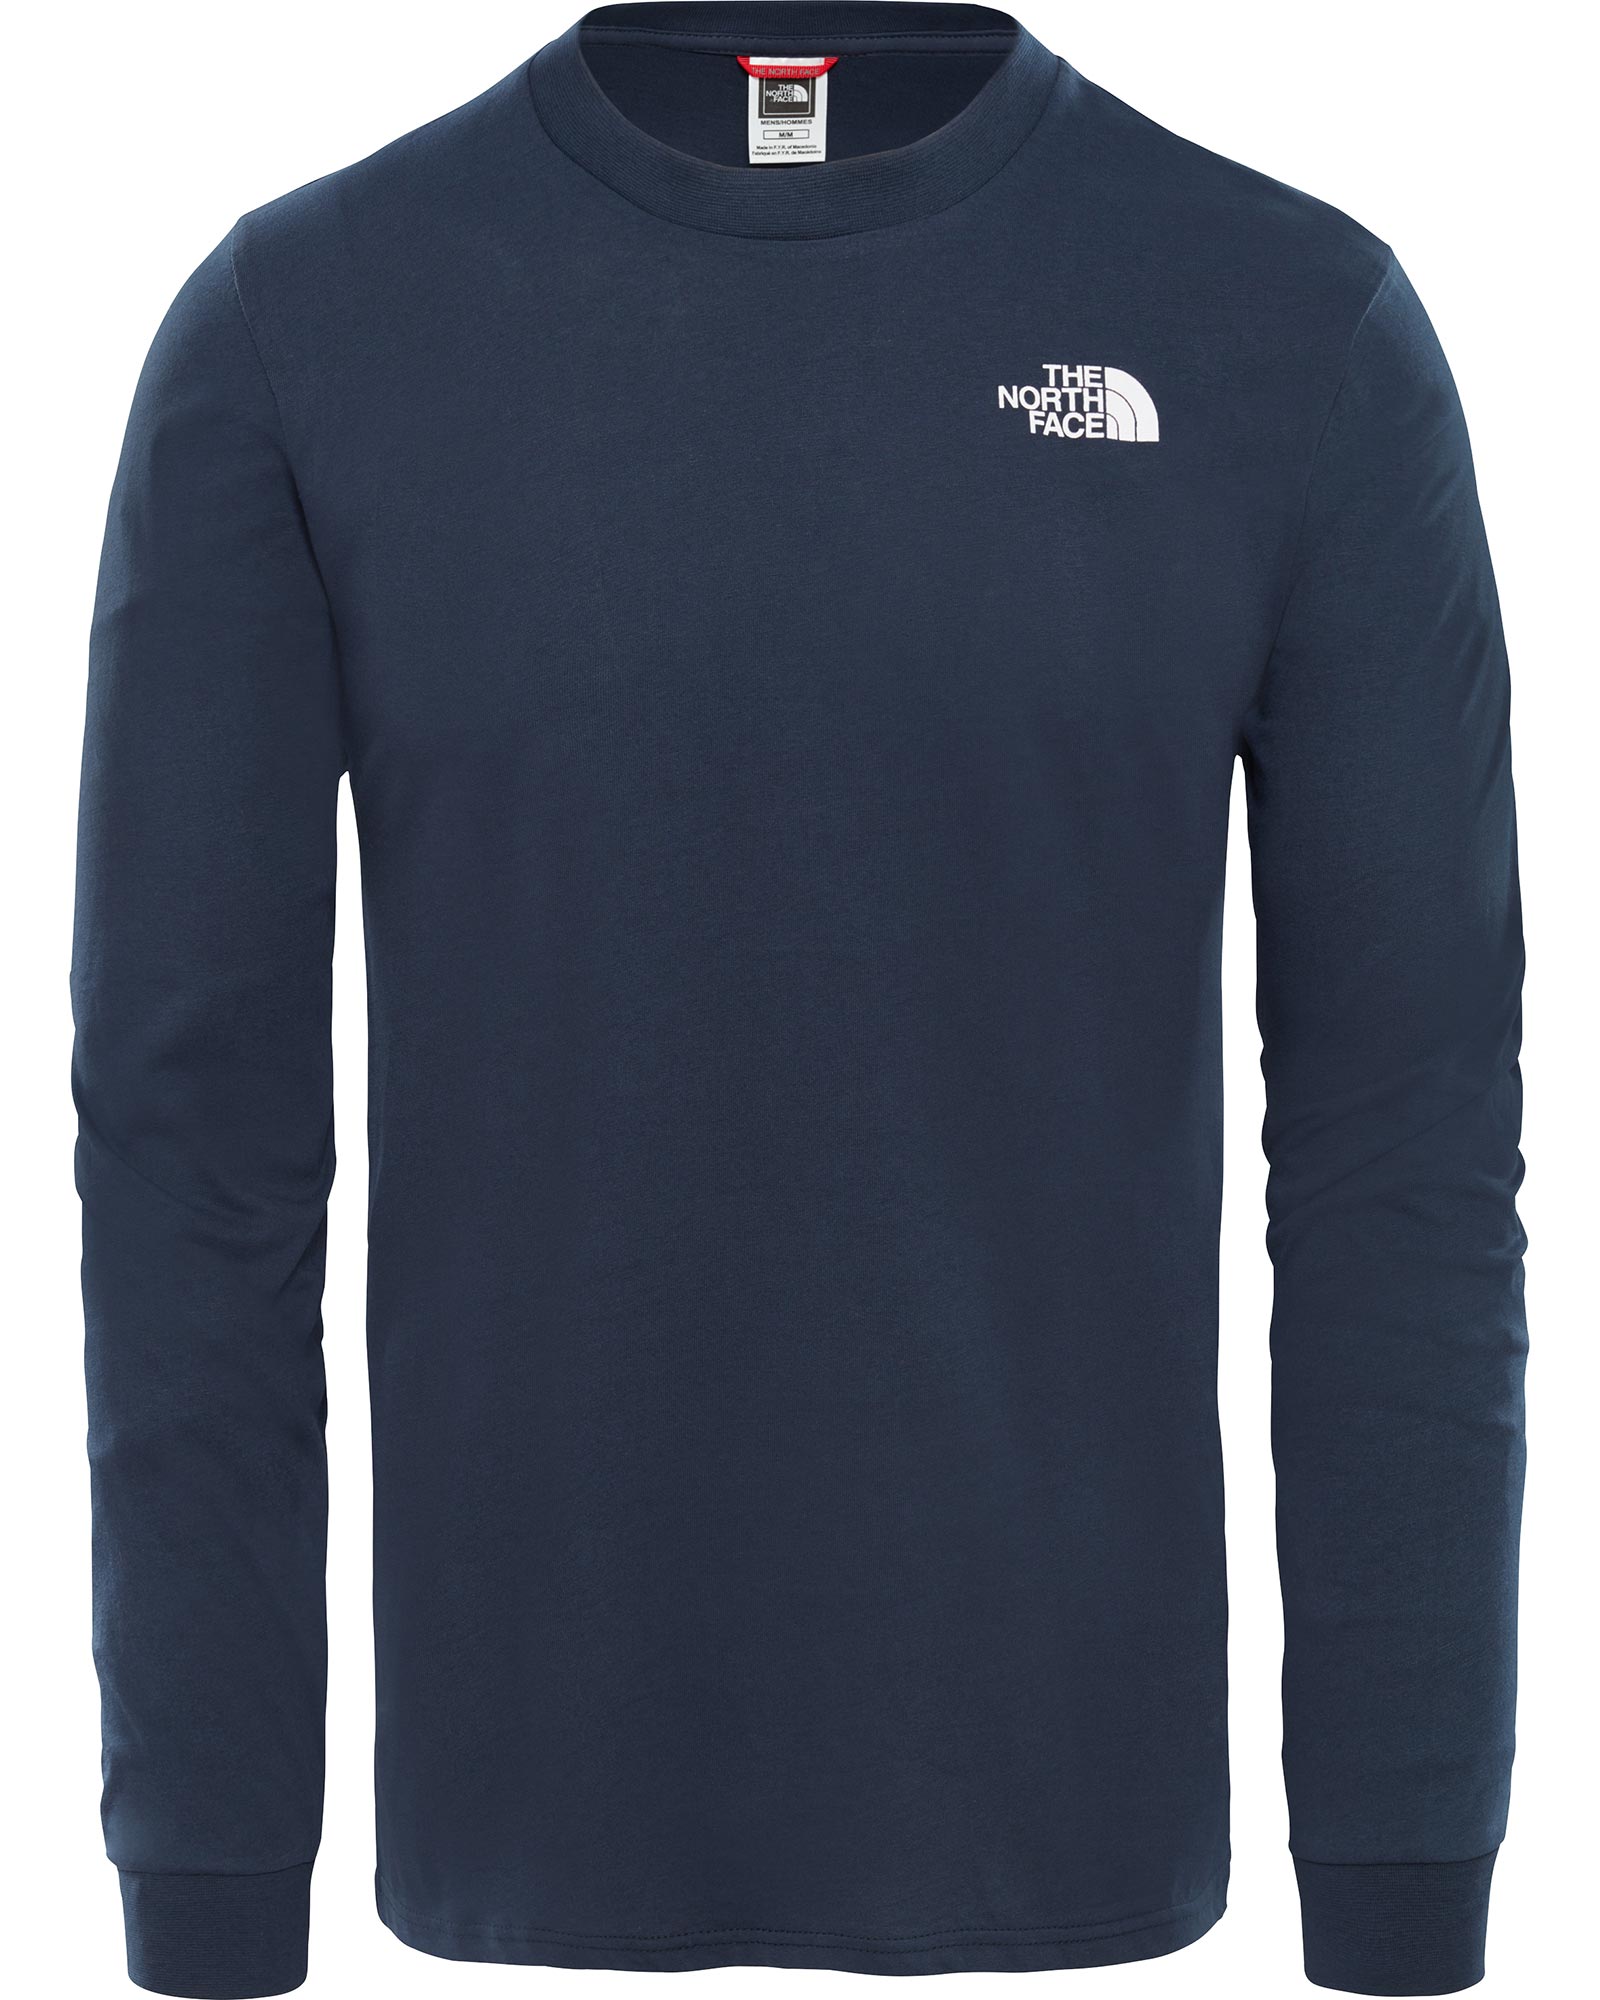 The North Face Simple Dome Men’s Long Sleeve T Shirt - Urban Navy XS